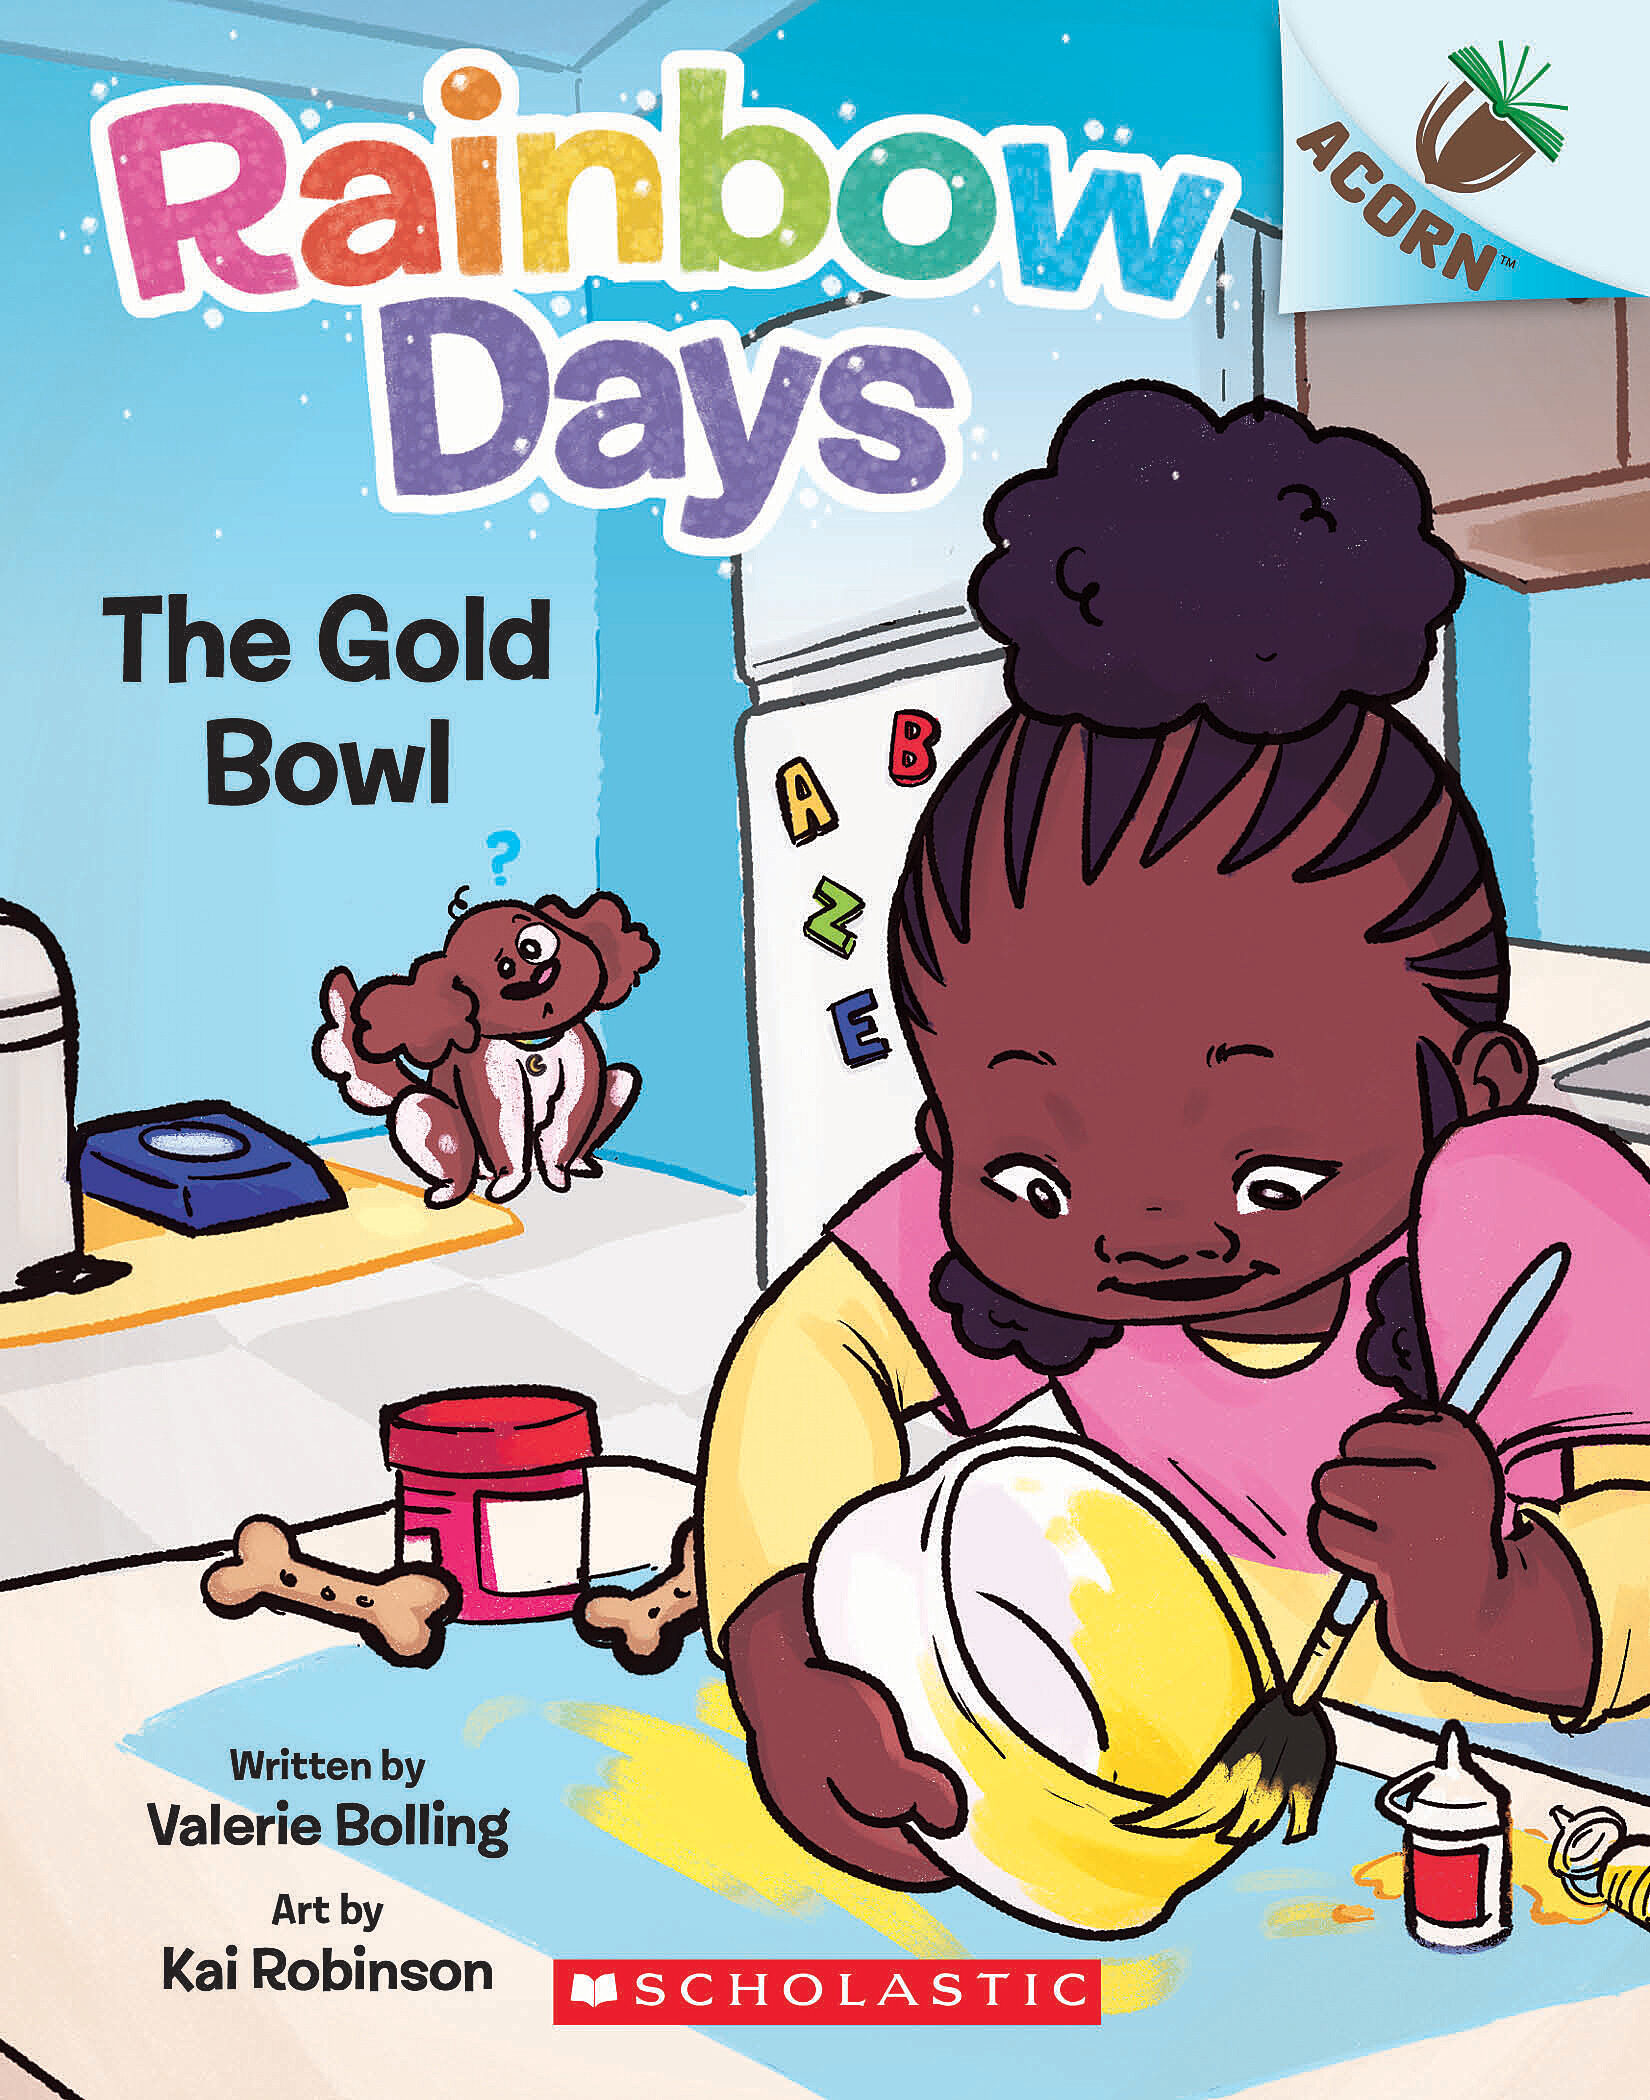 Image for "The Gold Bowl: An Acorn Book (Rainbow Days #2)"